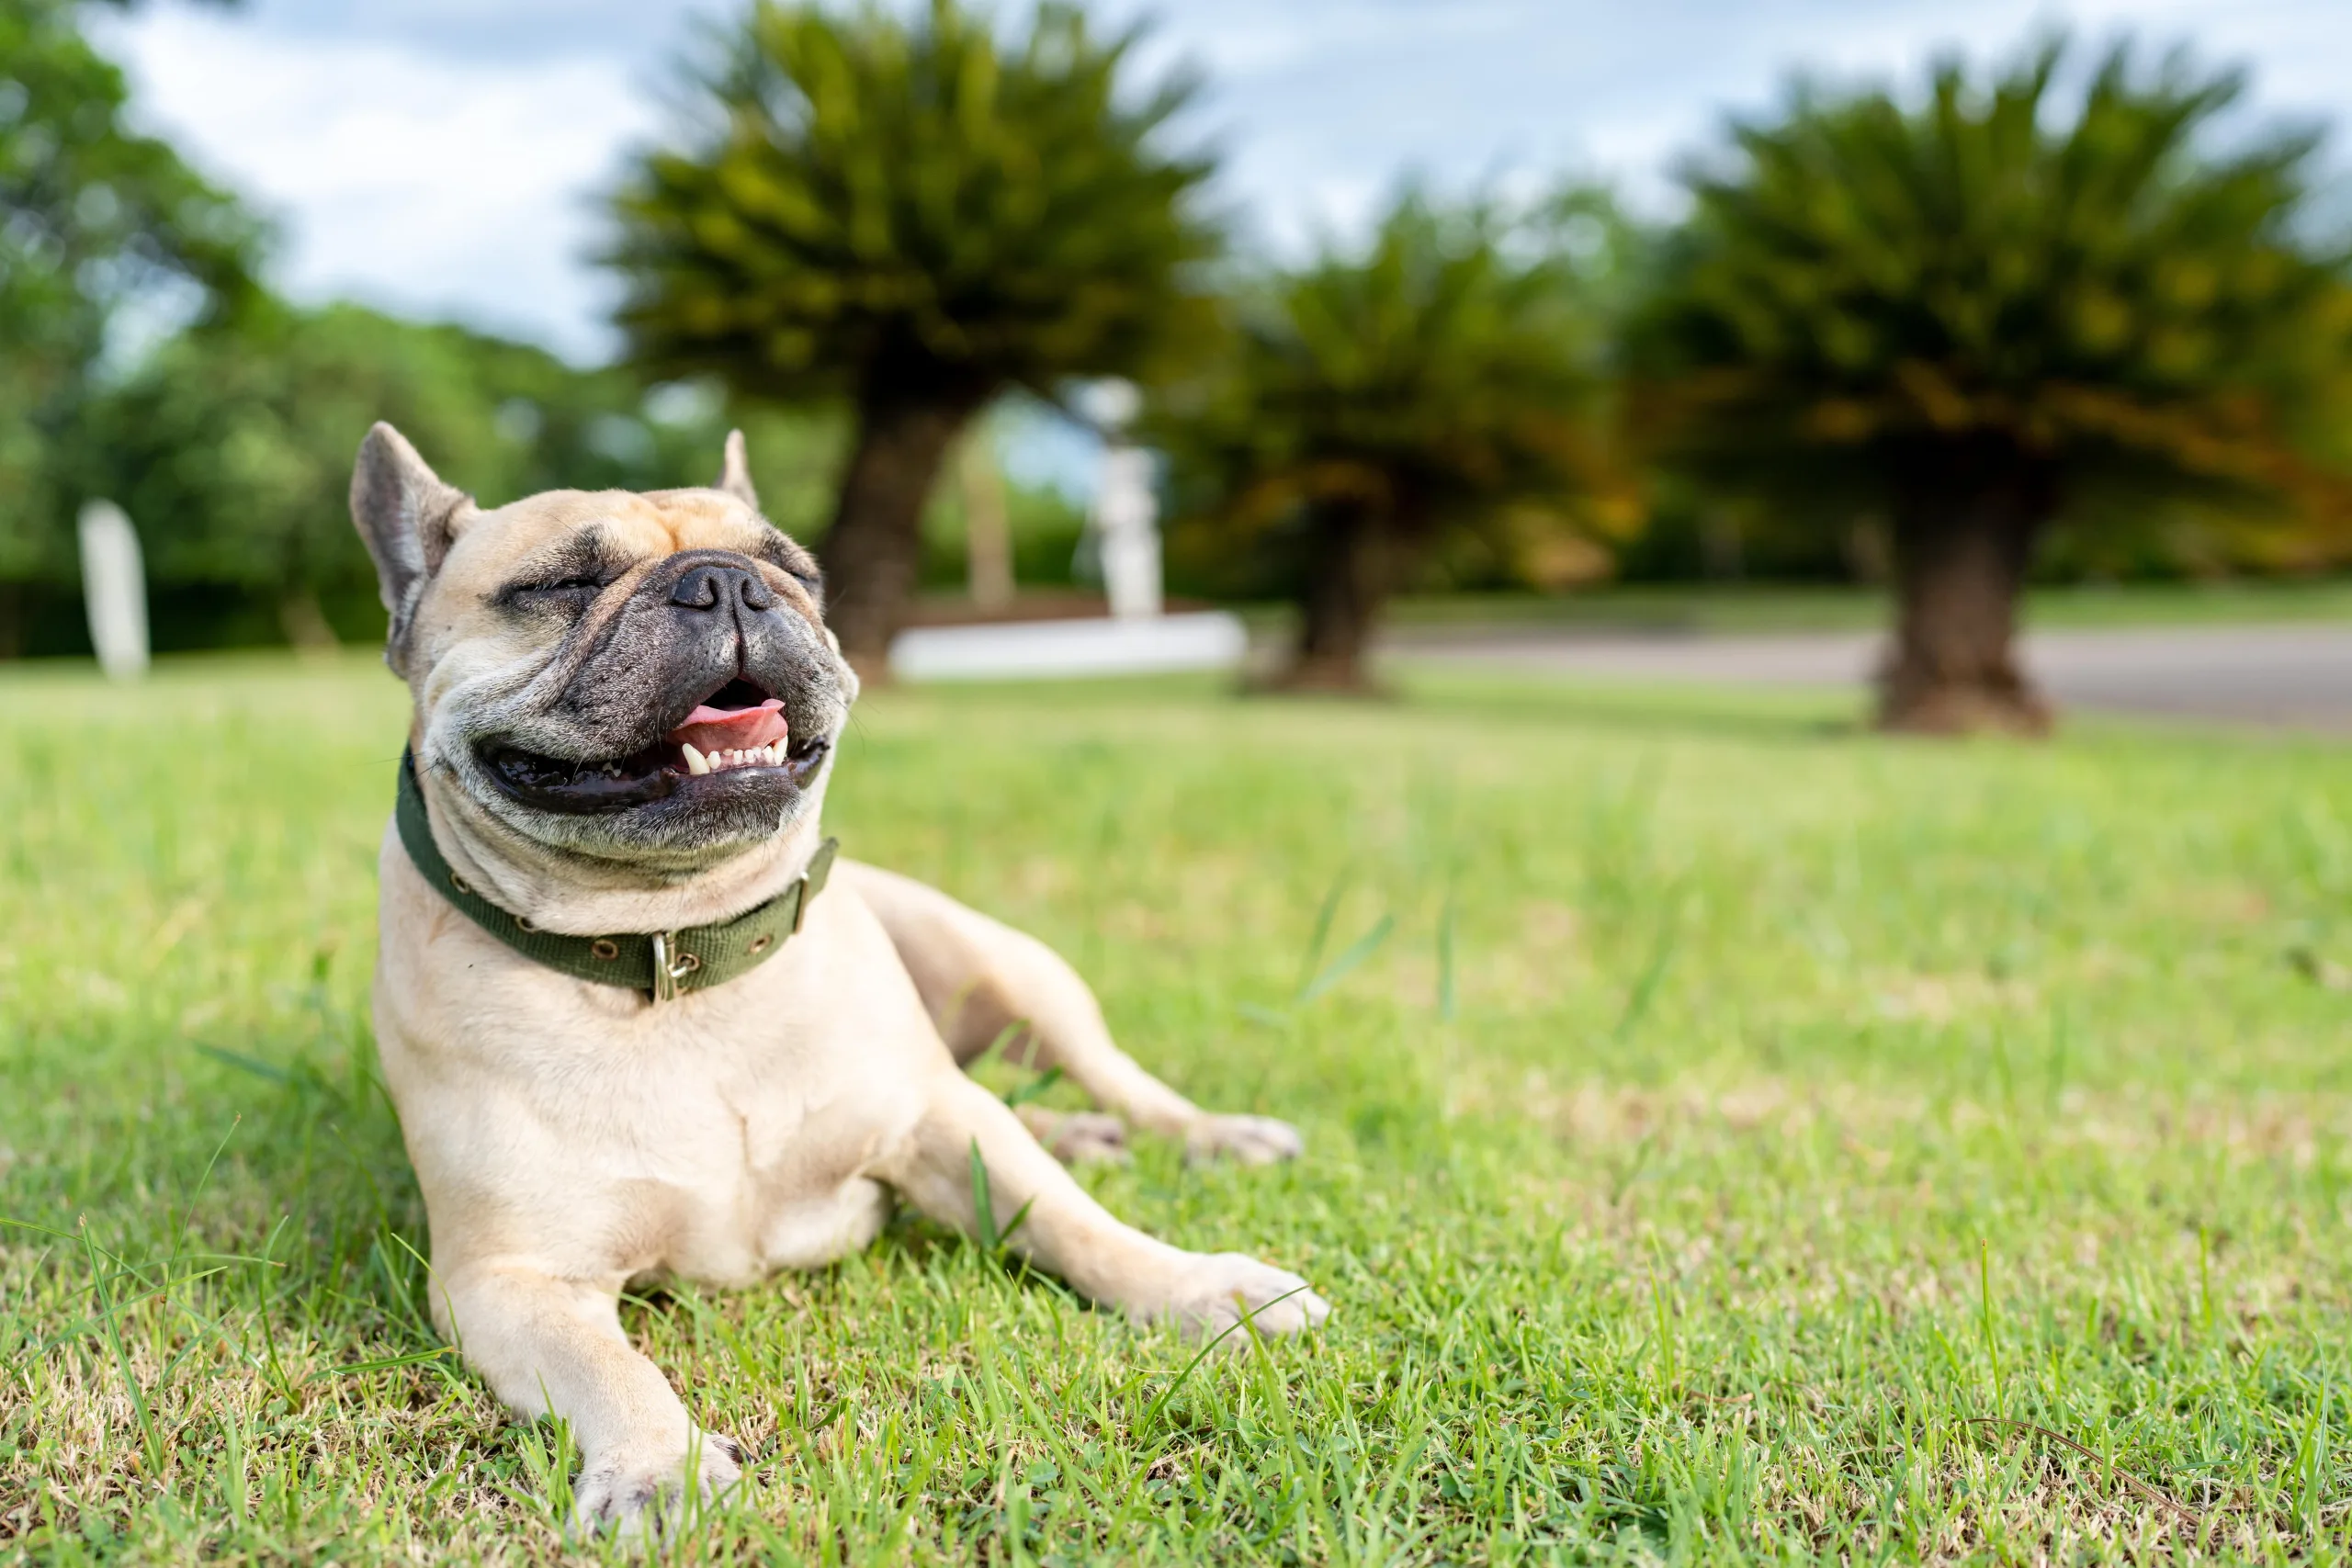 French Bulldog laying in the grass with eyes closed, and mouth open panting and grinning. He is wearing an olive-green buckle collar, and there are tropical trees in the background.